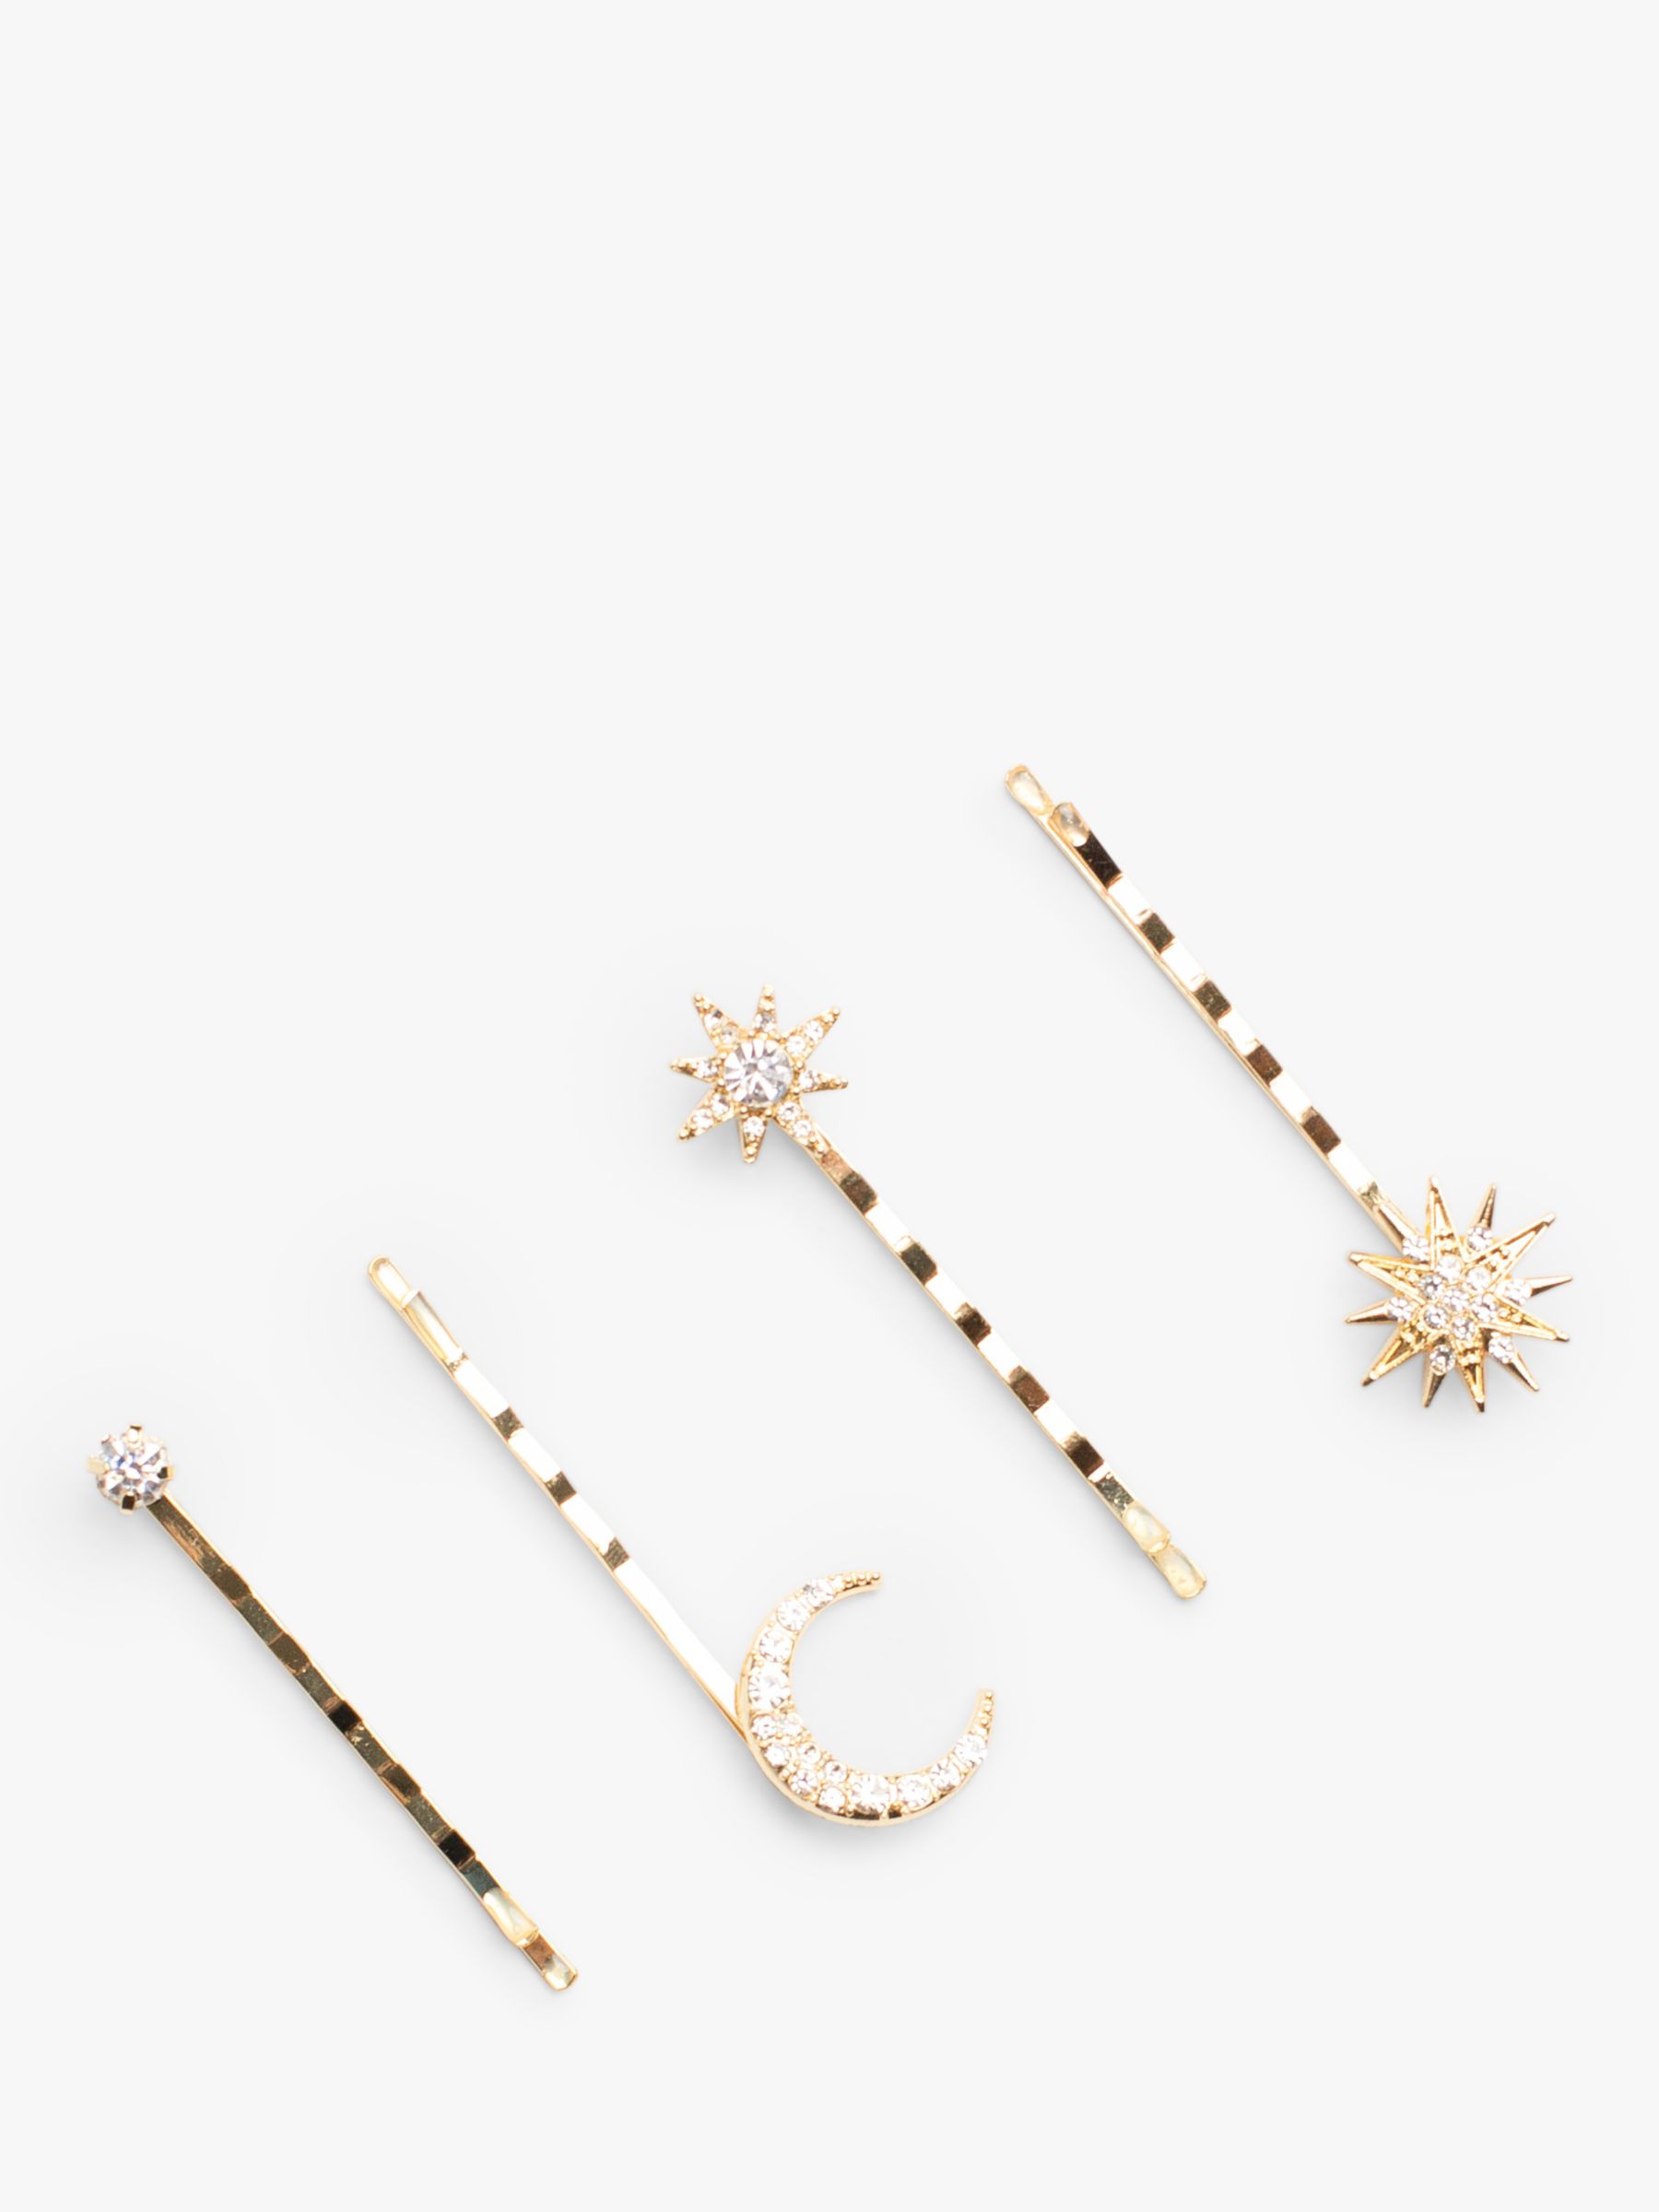 Buy Bloom & Bay Peony Celestial Hair Clip Set, Pack of 4, Gold Online at johnlewis.com